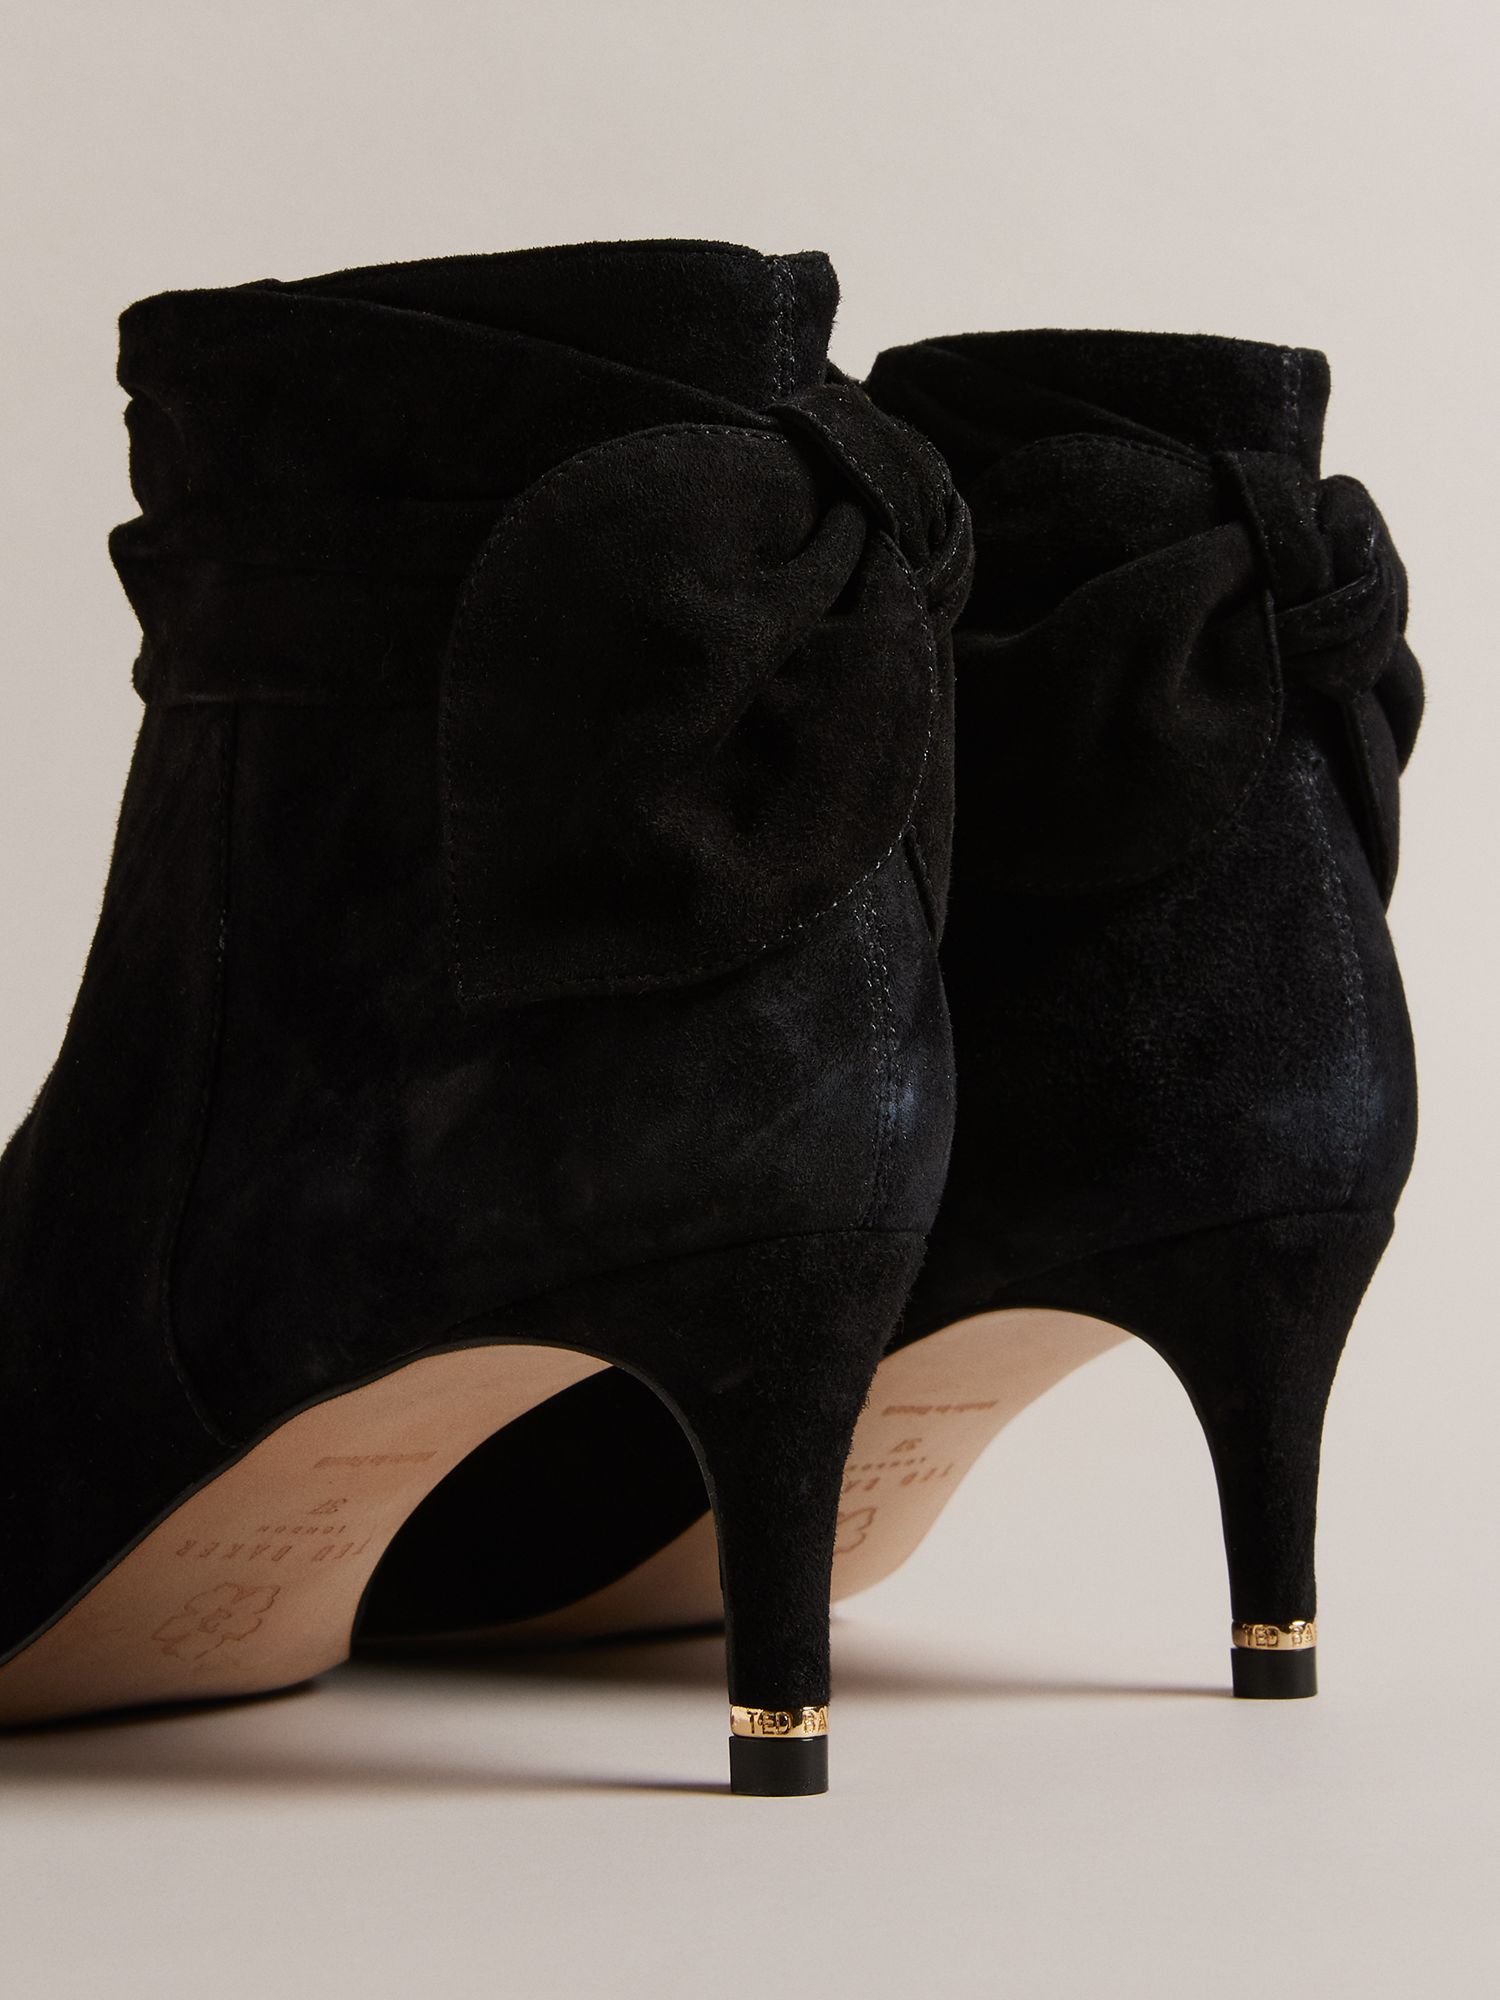 Ted Baker Yona Leather Ankle Boots, Black at John Lewis & Partners